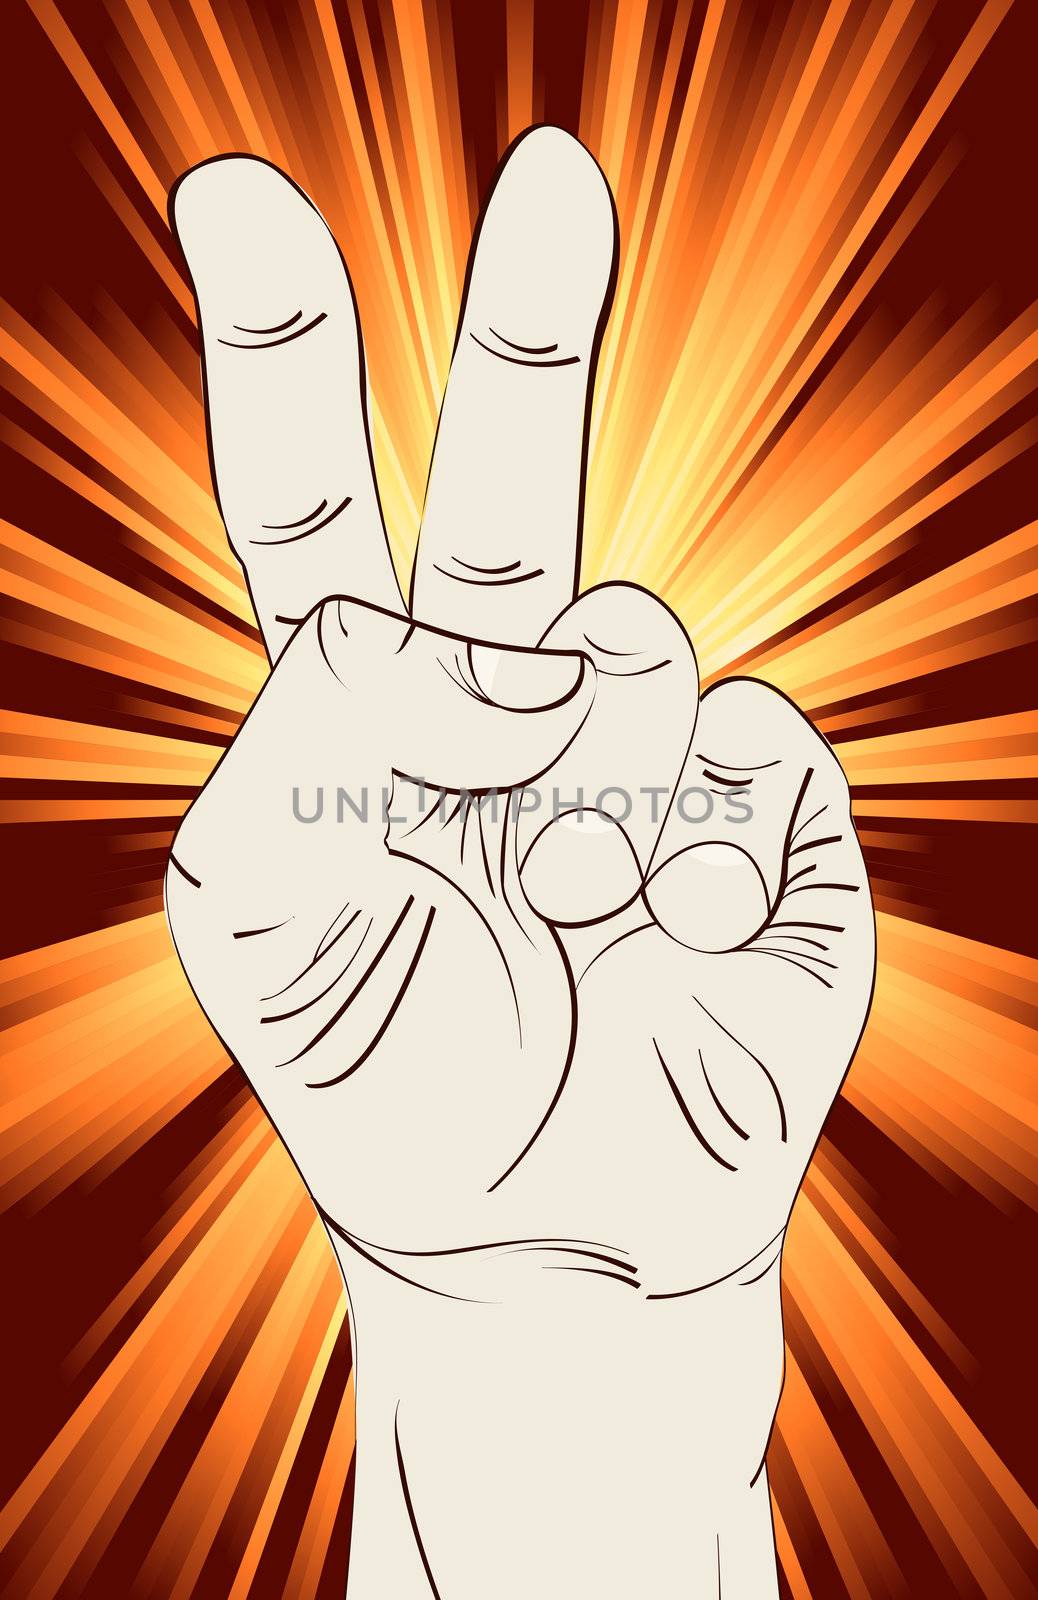 Victory hand sign clip art over exploding rays background.